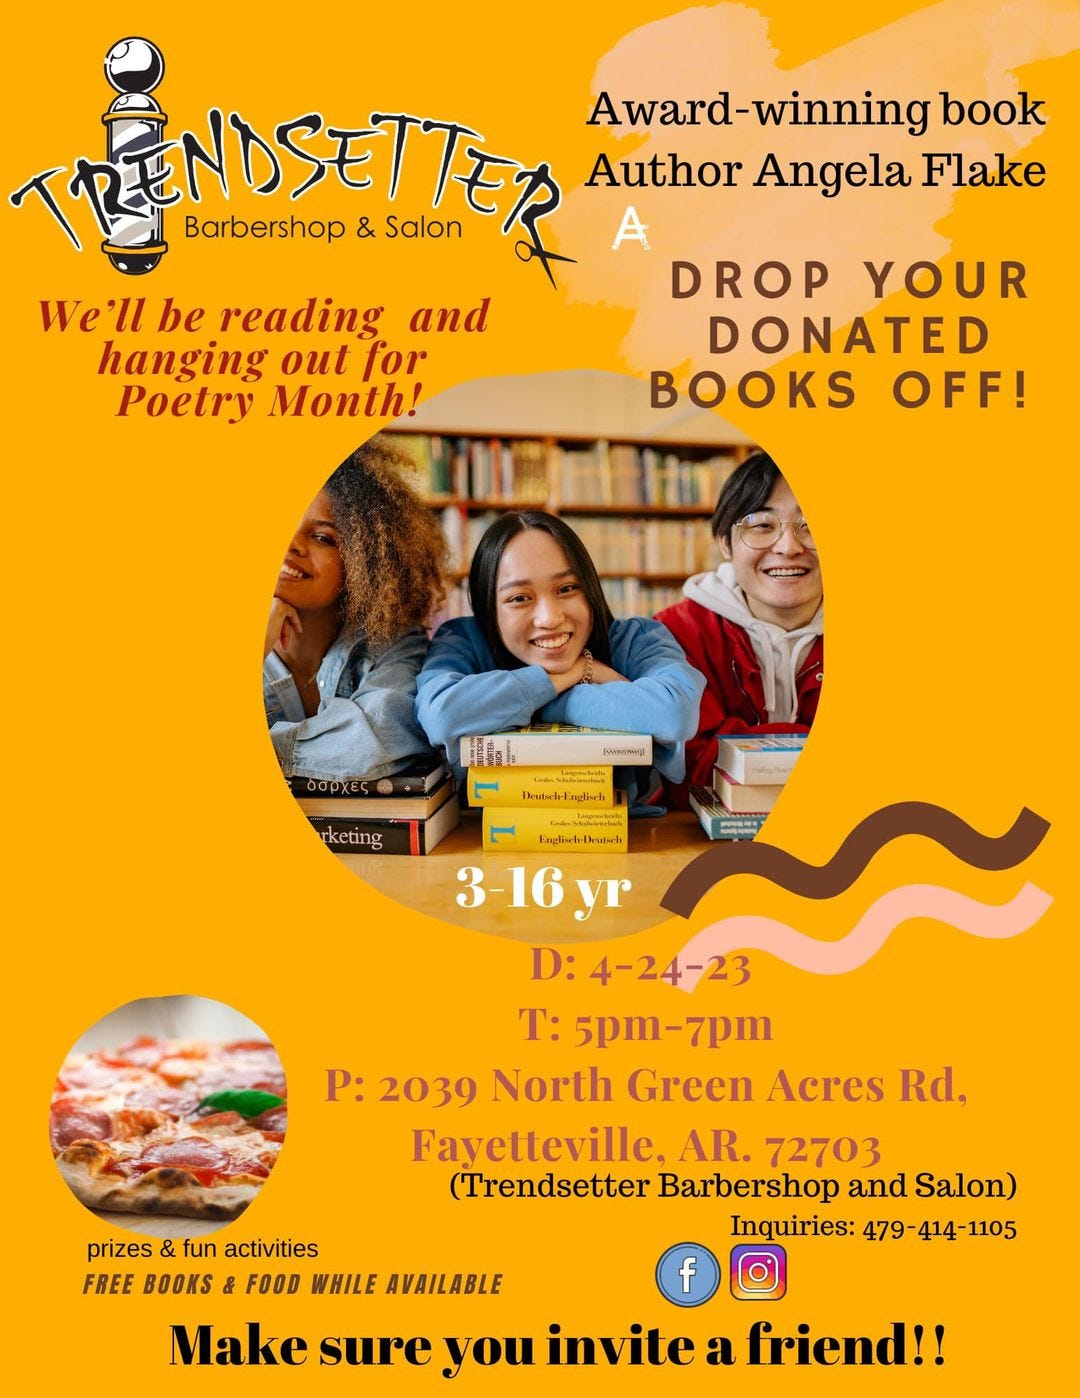 May be an image of 3 people and text that says 'Barbershop ENDSETT & Salon We'll be reading and hanging out for Poetry Month! Award-winning book Author Angela Flake A DROP YOUR DONATED BOOKS OFF! δσρχες wasg) 1nL Sr Deutsch-Englisch keting ു Englisch-Deutsch -16yr D:4-24-23 T: 5pm-7pm P: 2039 North Green Acres Rd, Fayetteville. AR. 72703 (Trendsetter Barbershop and Salon) Inquiries: 479 414-1105 prizes & fun activities FREE BOOKS & FOOD WHILE AVAILABLE f Make sure you invite a friend!!'